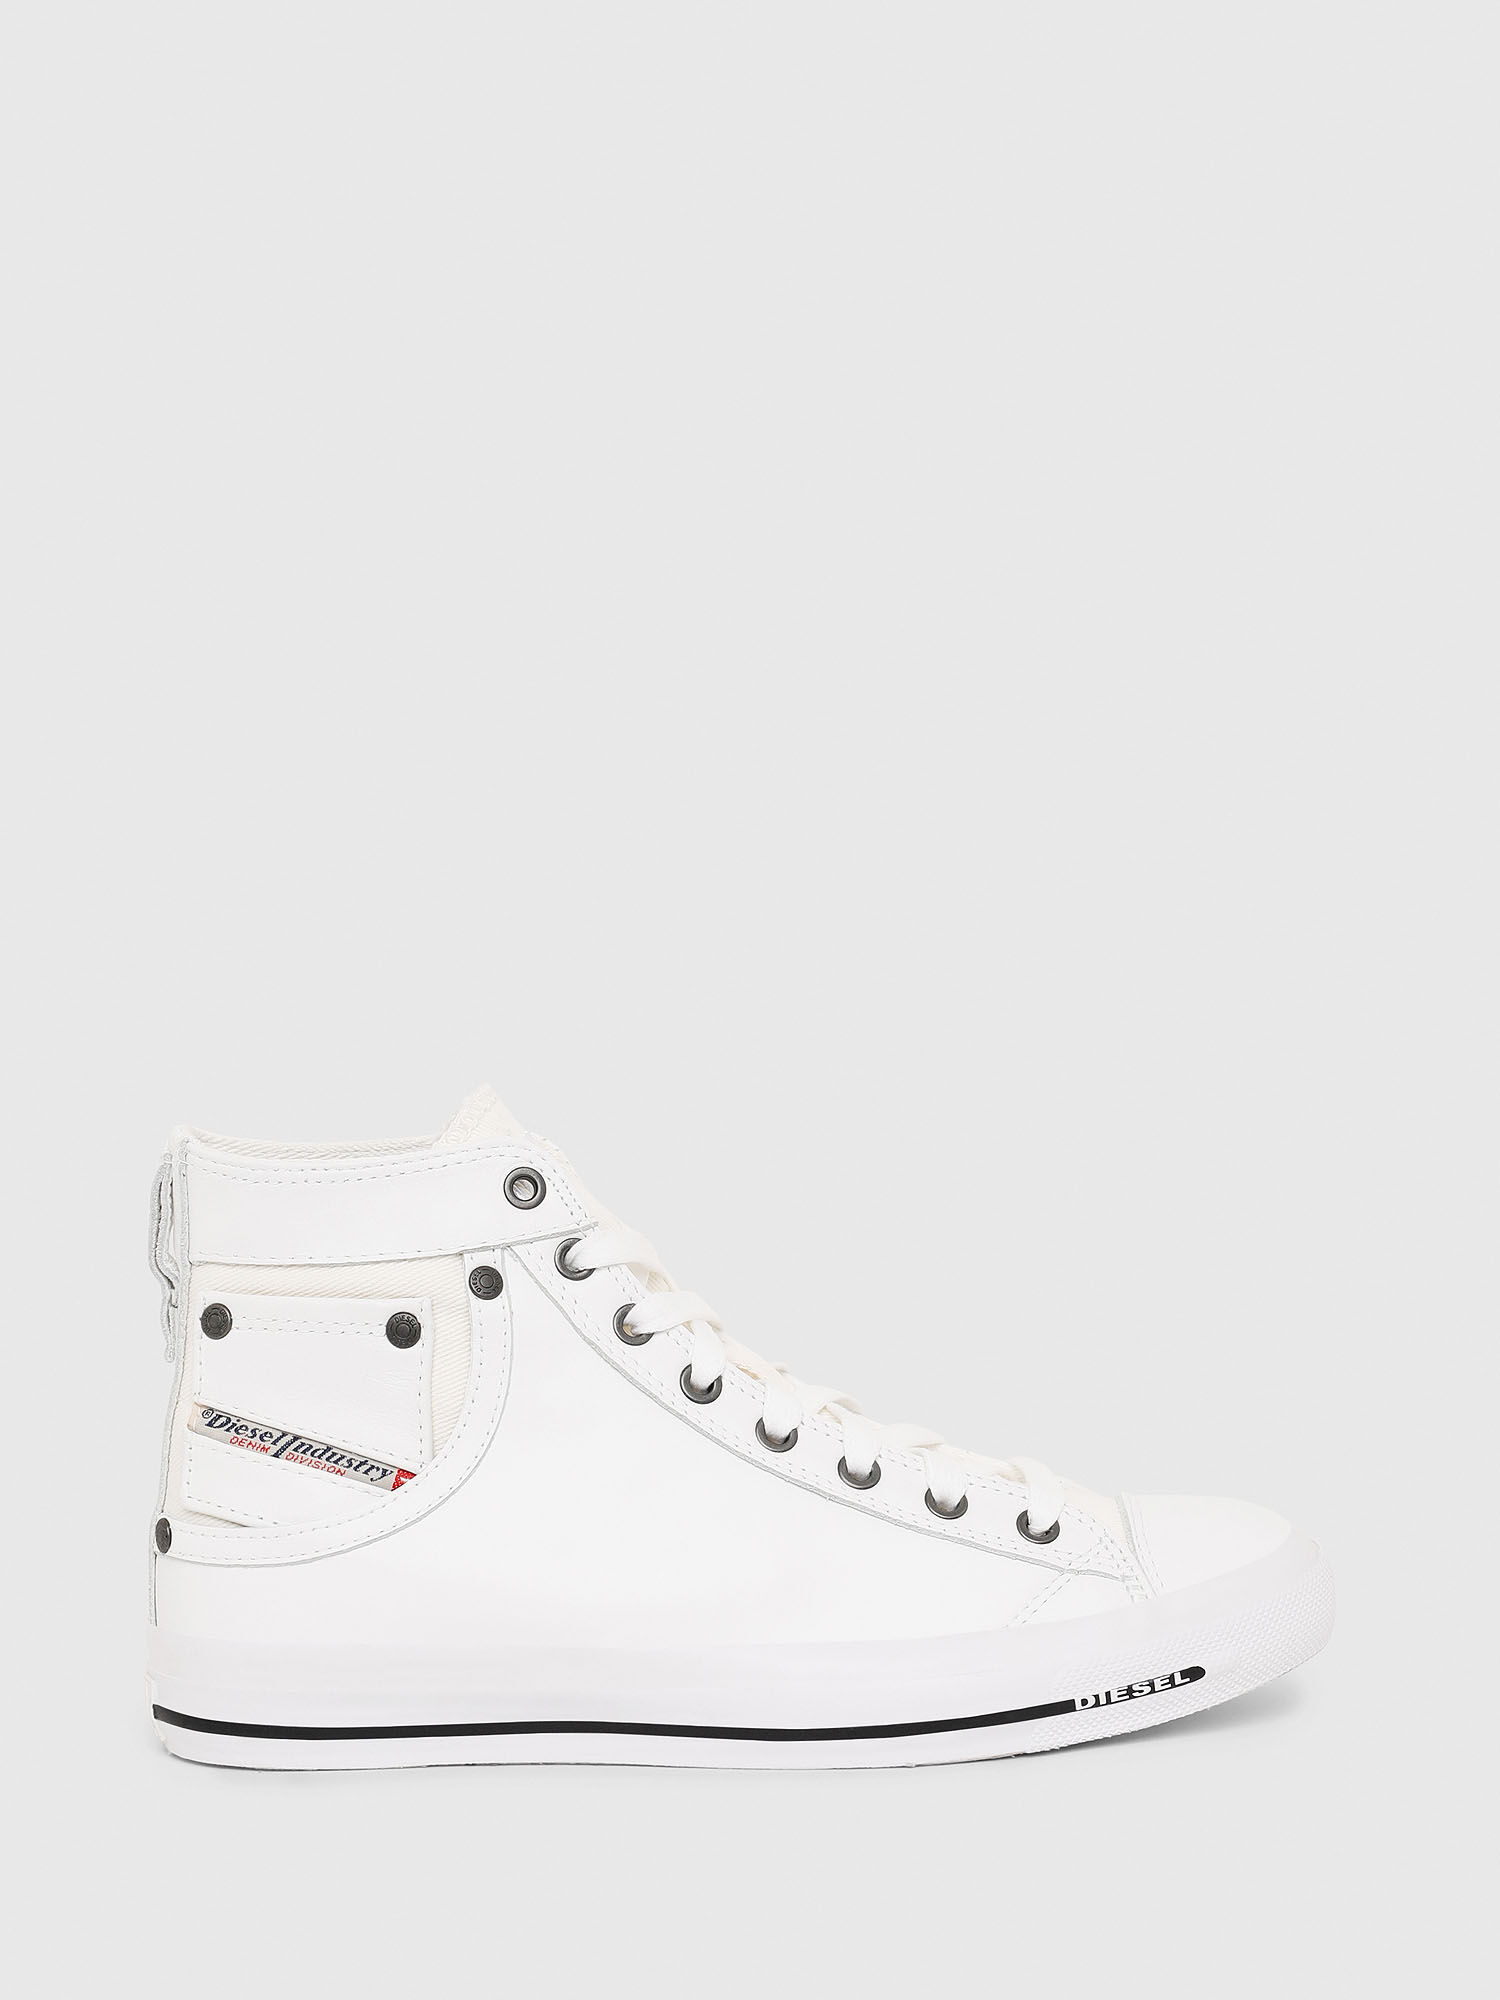 Parcel Mockingbird spansk EXPOSURE IV W Women: High-top sneakers in leather and canvas | Diesel